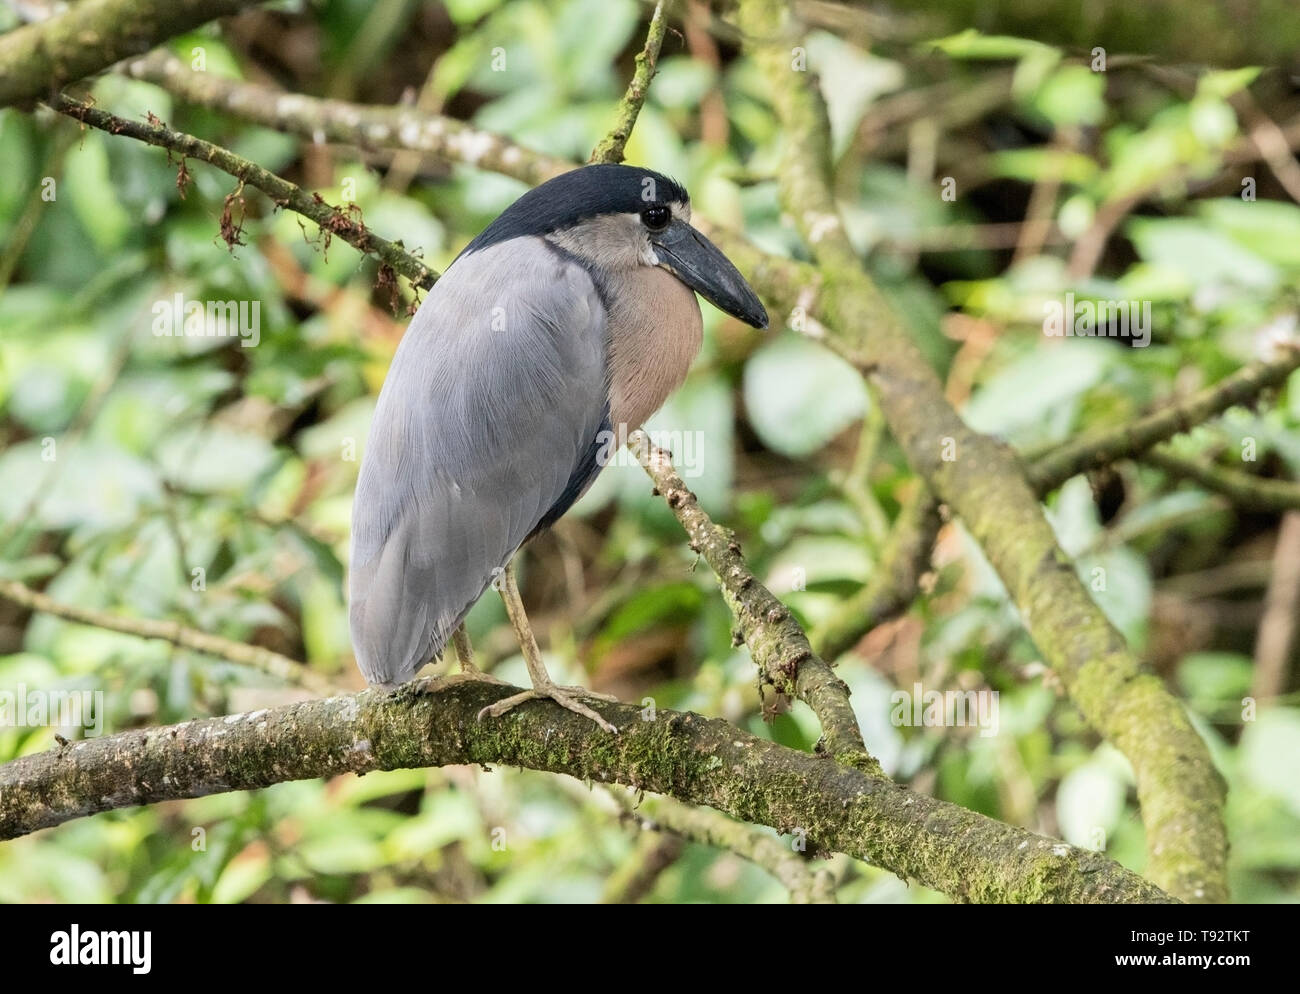 Boat-billed Heron, adult perched in tree, Selva Verde, Costa Rica 27 March 2019 Stock Photo